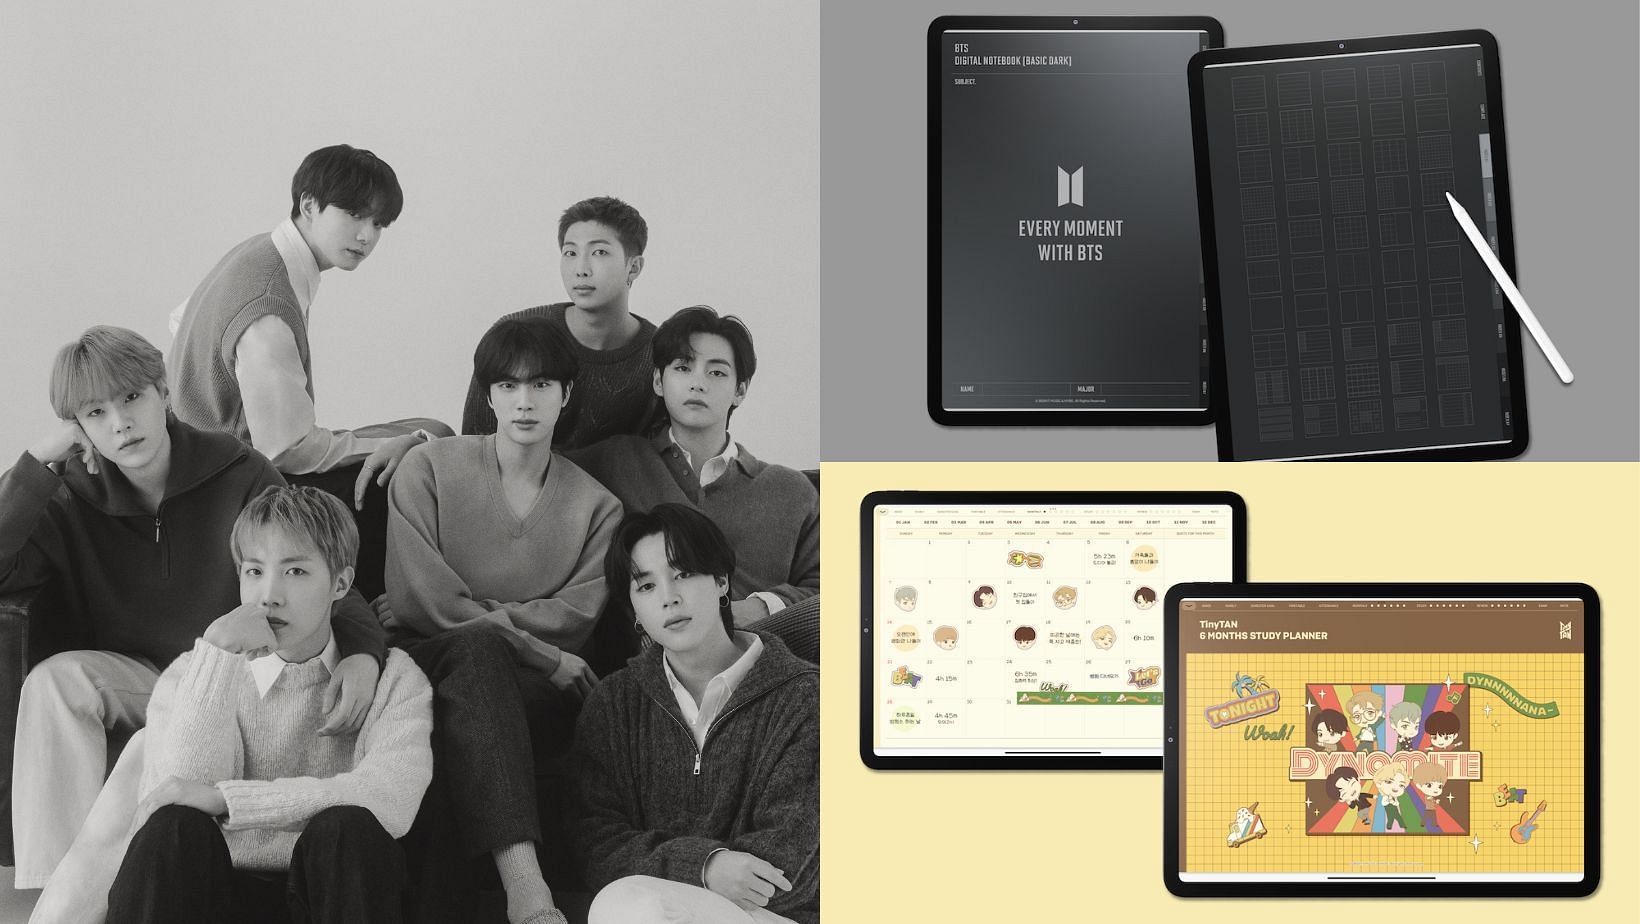 BTS collaborates with Goodnotes in creating one-of-a-kind stationery collection. (Images via X/@bts_bighit and Goodnotes website)